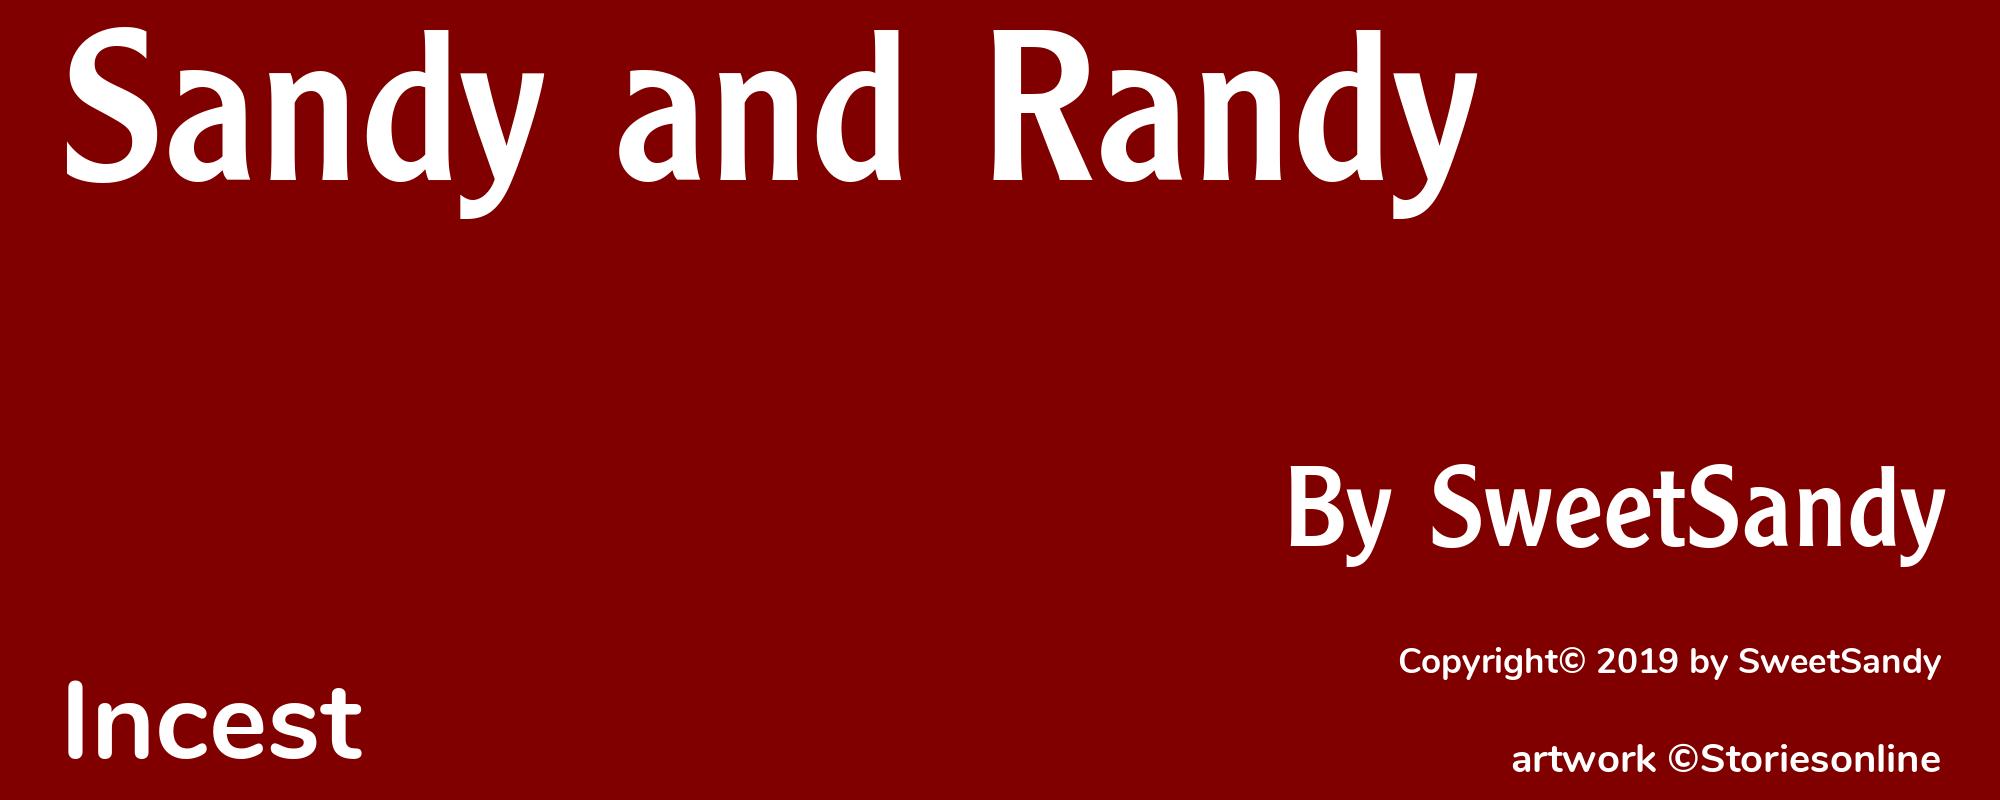 Sandy and Randy - Cover